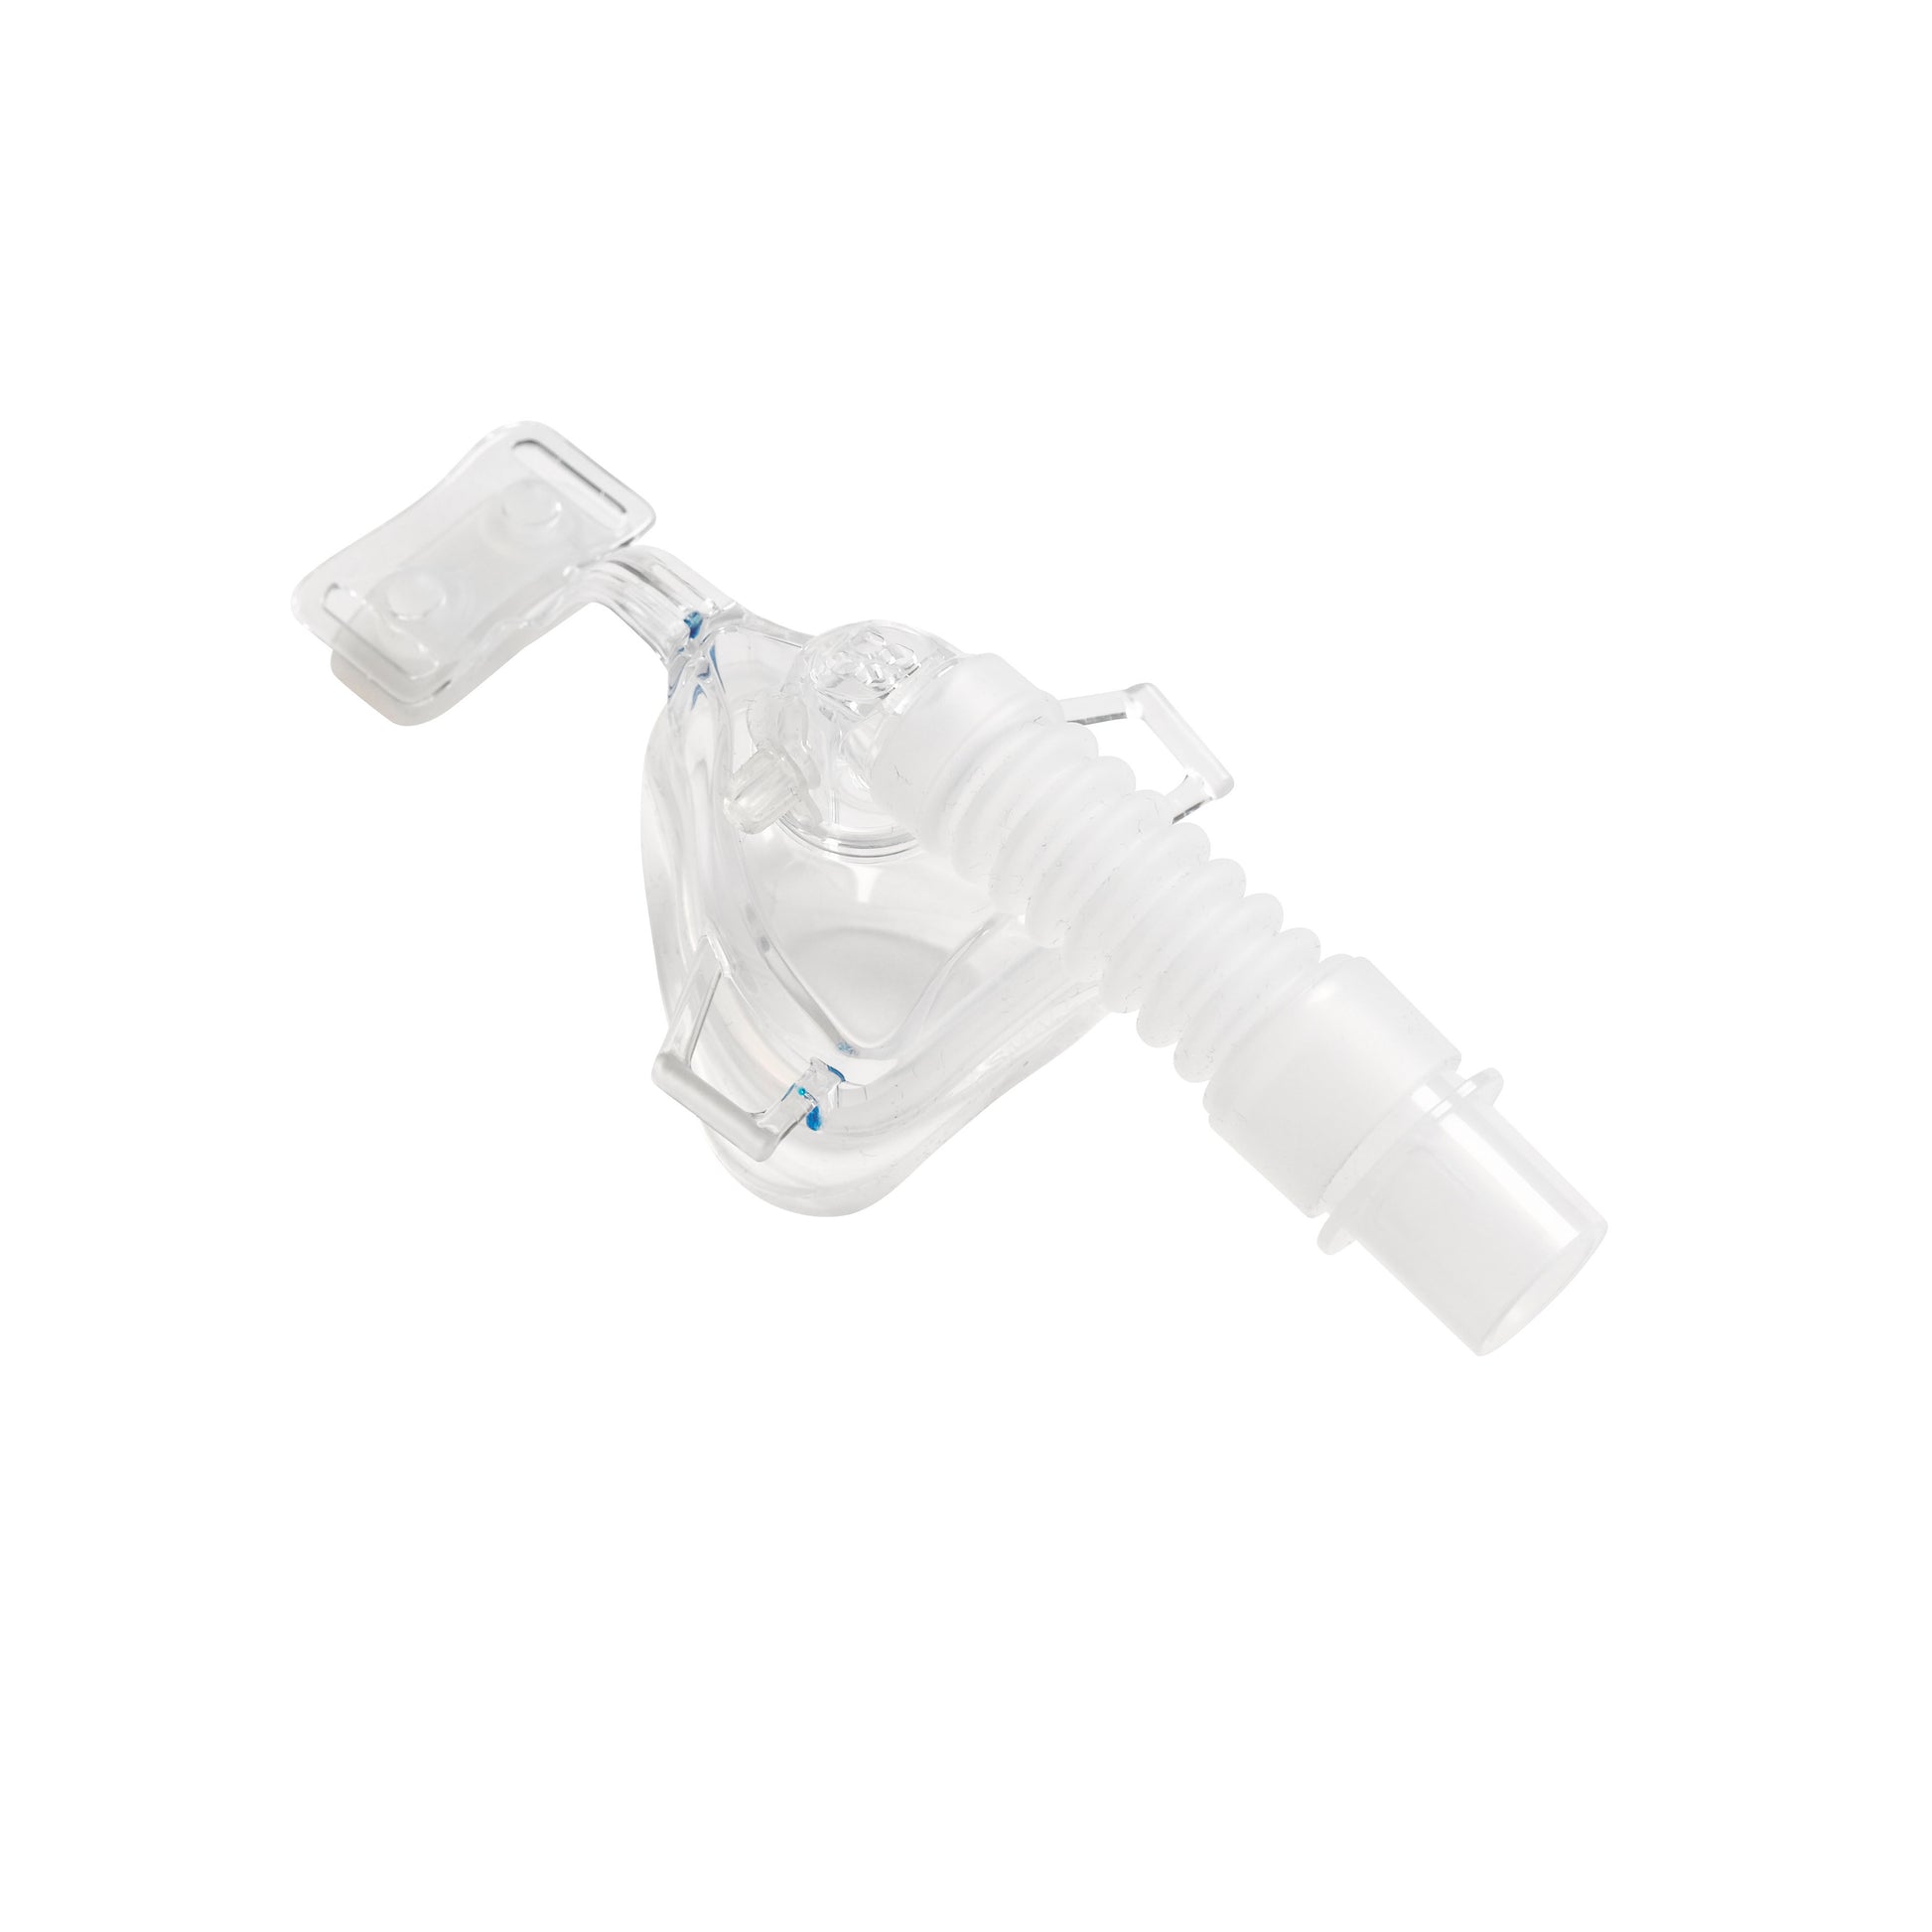 NasalFit Deluxe EZ CPAP Mask without Headgear, Large